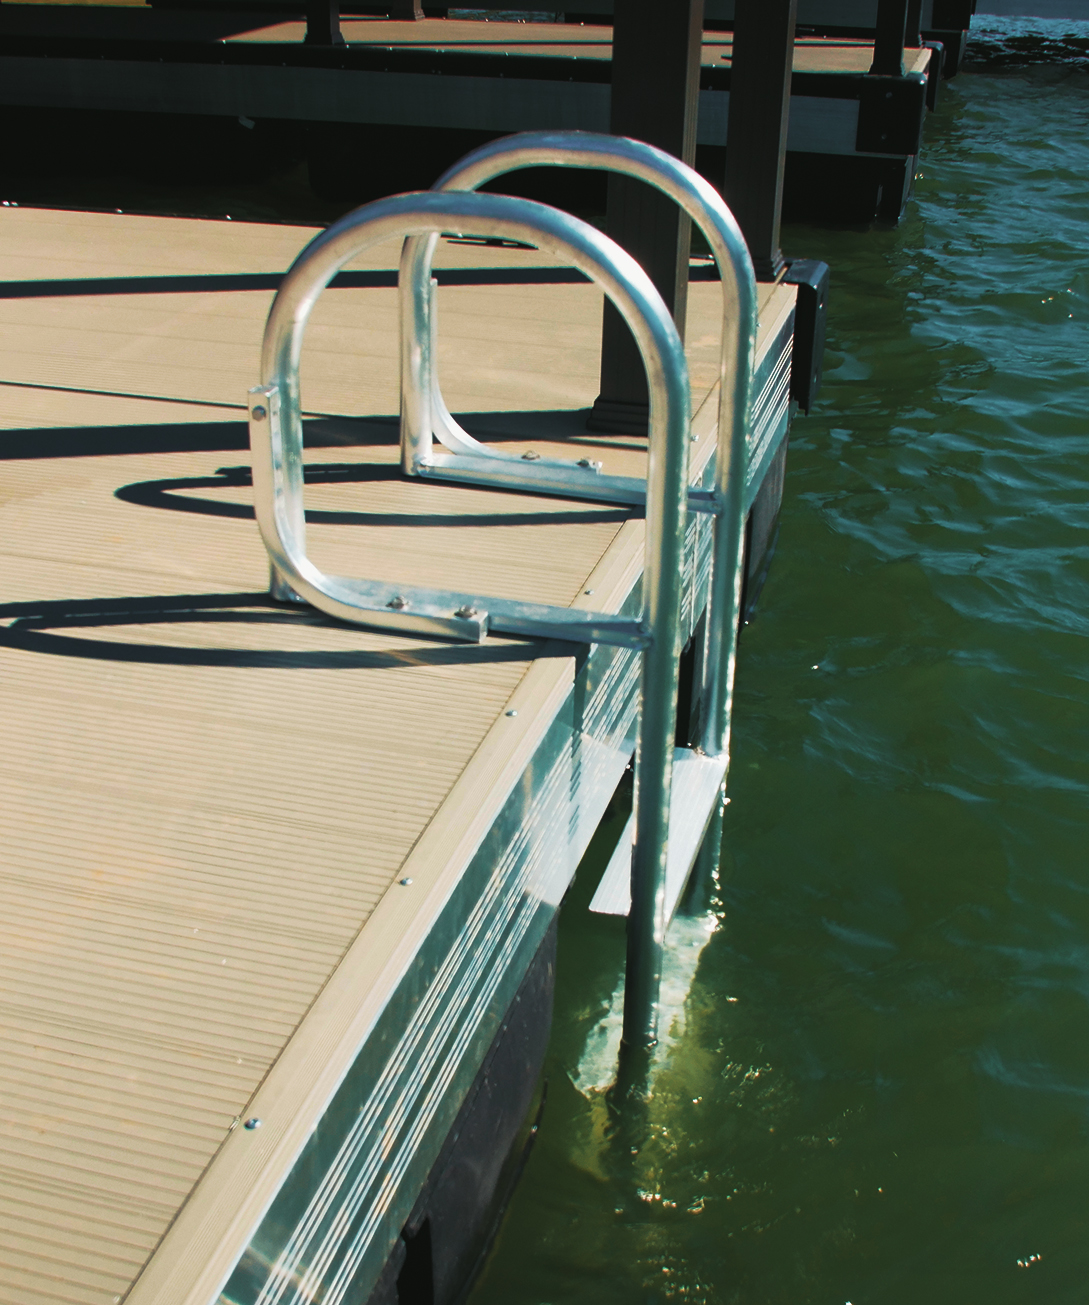 Flotation Systems, Inc. swim ladder in the water